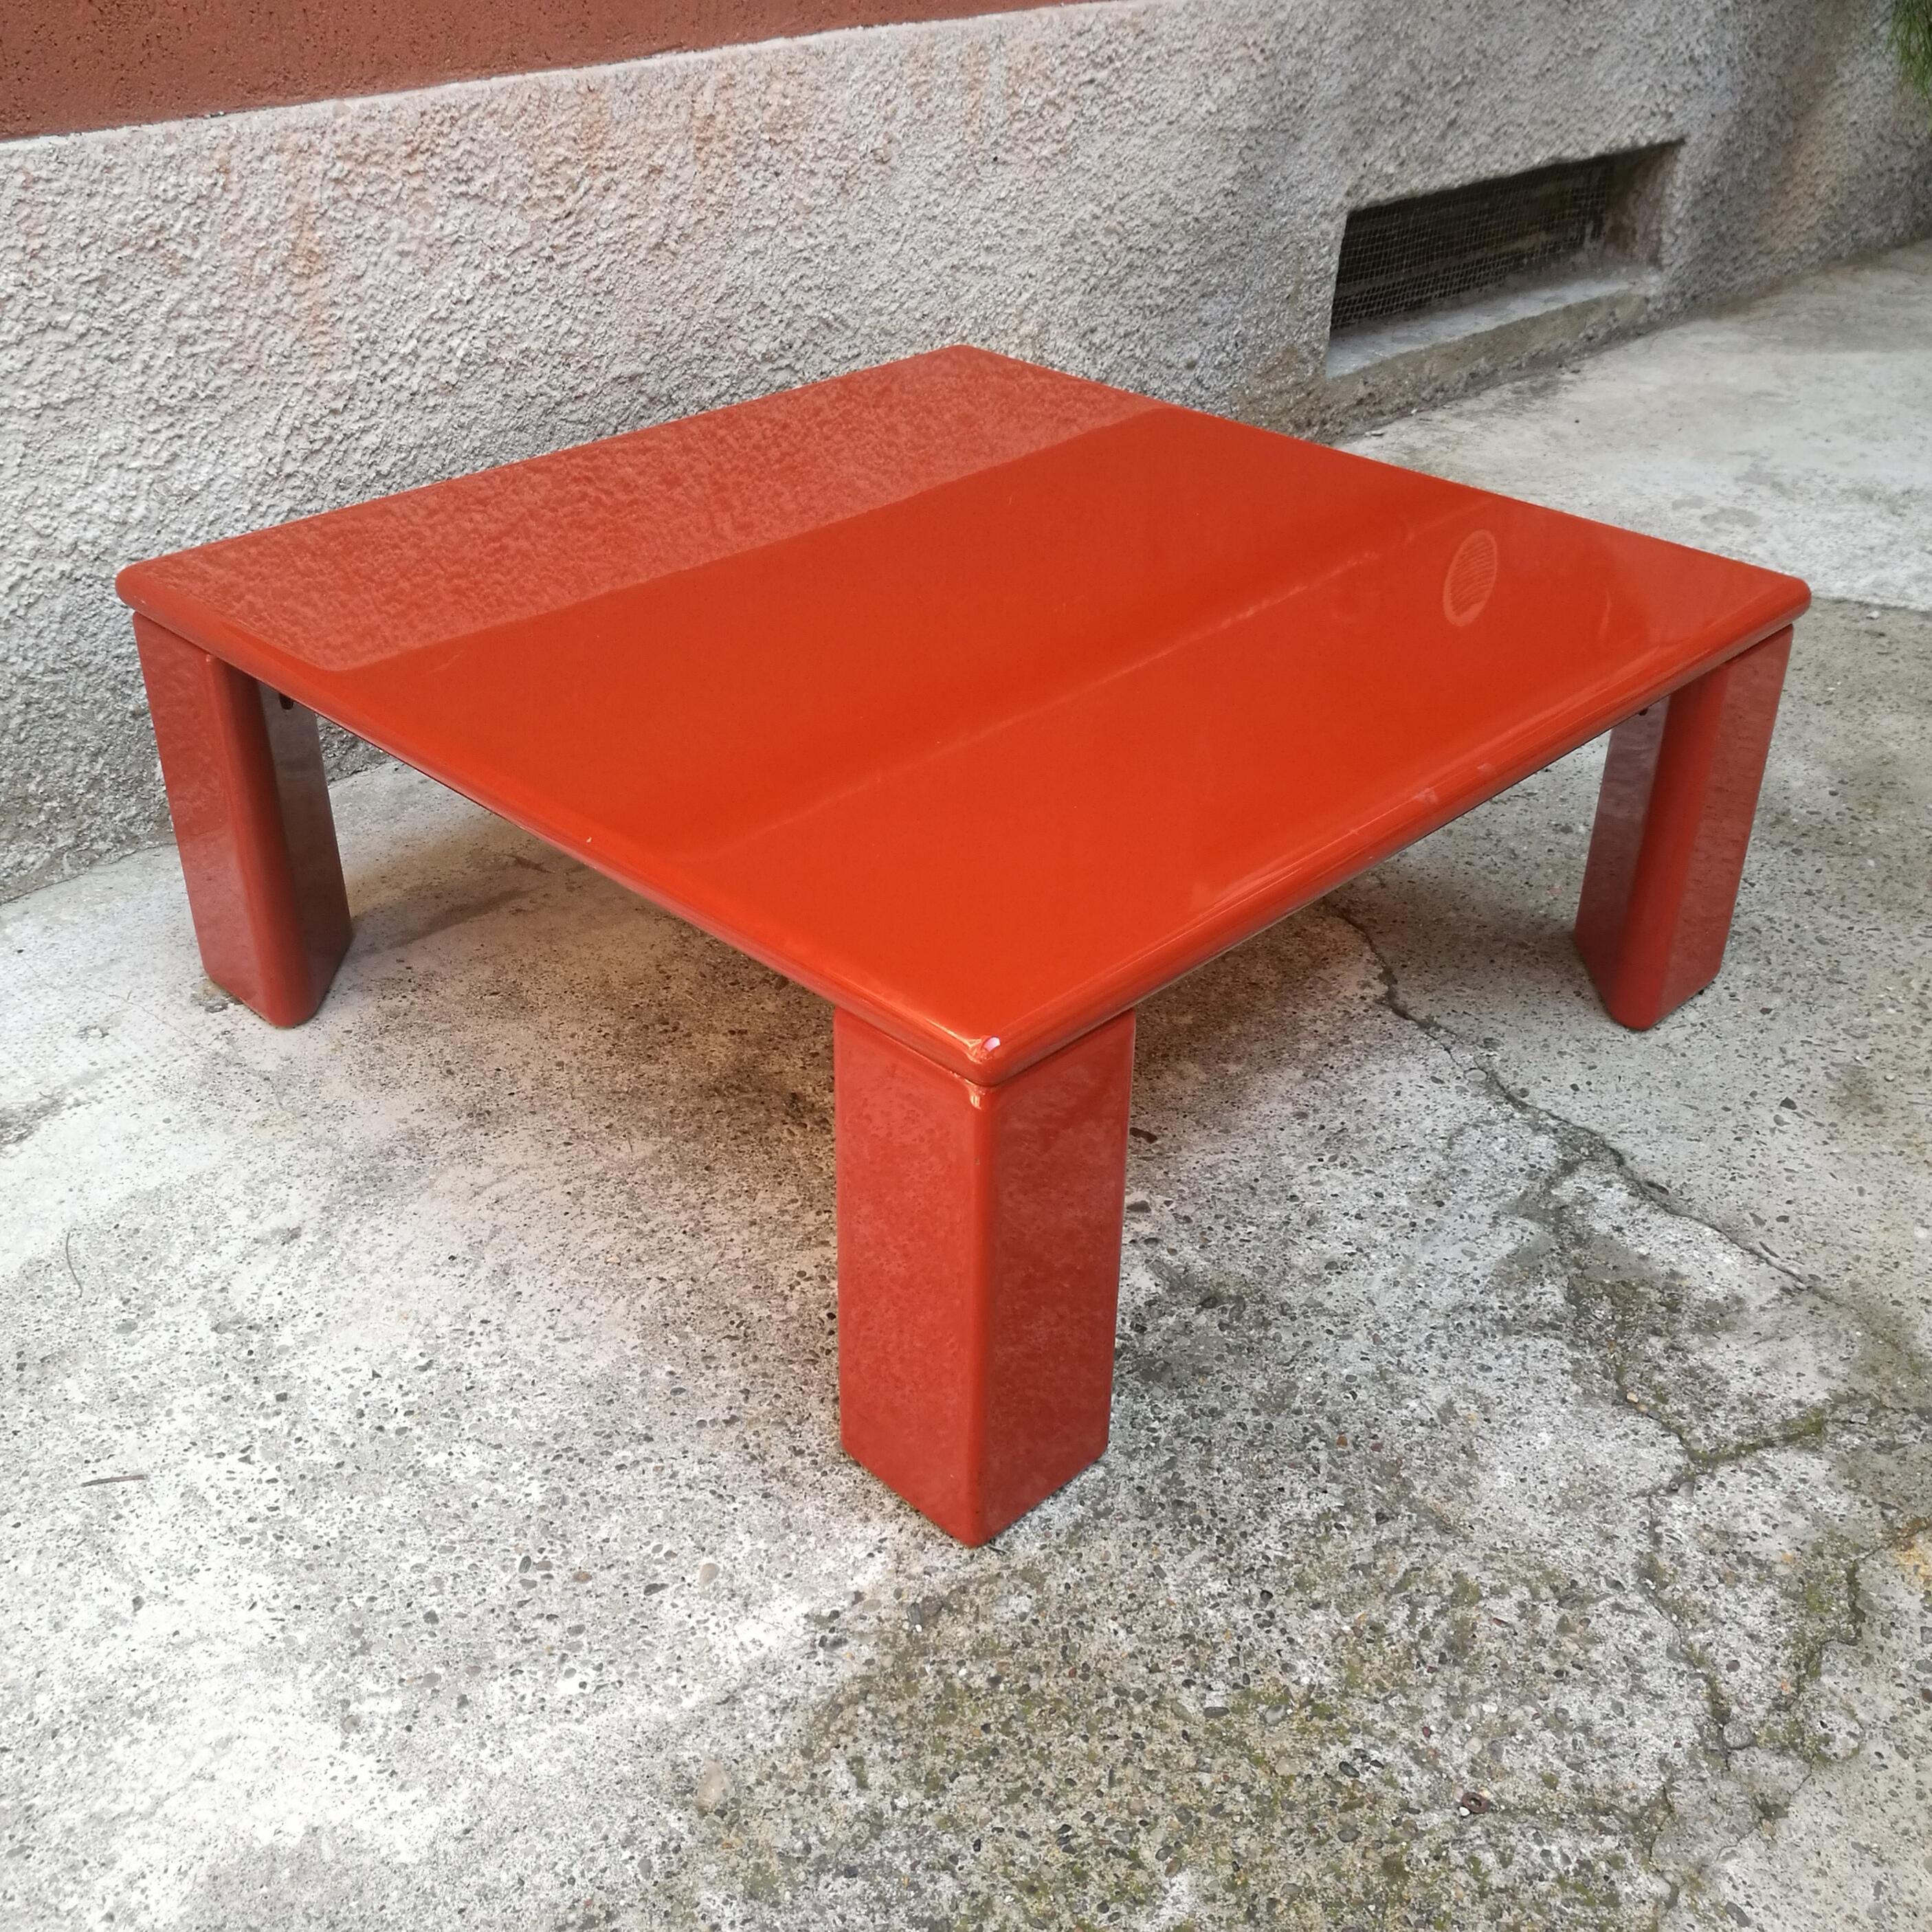 Italian lacquered wood Ming by table, by Kazuhide Takahama for Cassina, 1970s
Ming coffee table designed by Kazuhide Takahama for Cassina, in red-brick lacquered wood, with four legs with a triangular section
Very good condition.